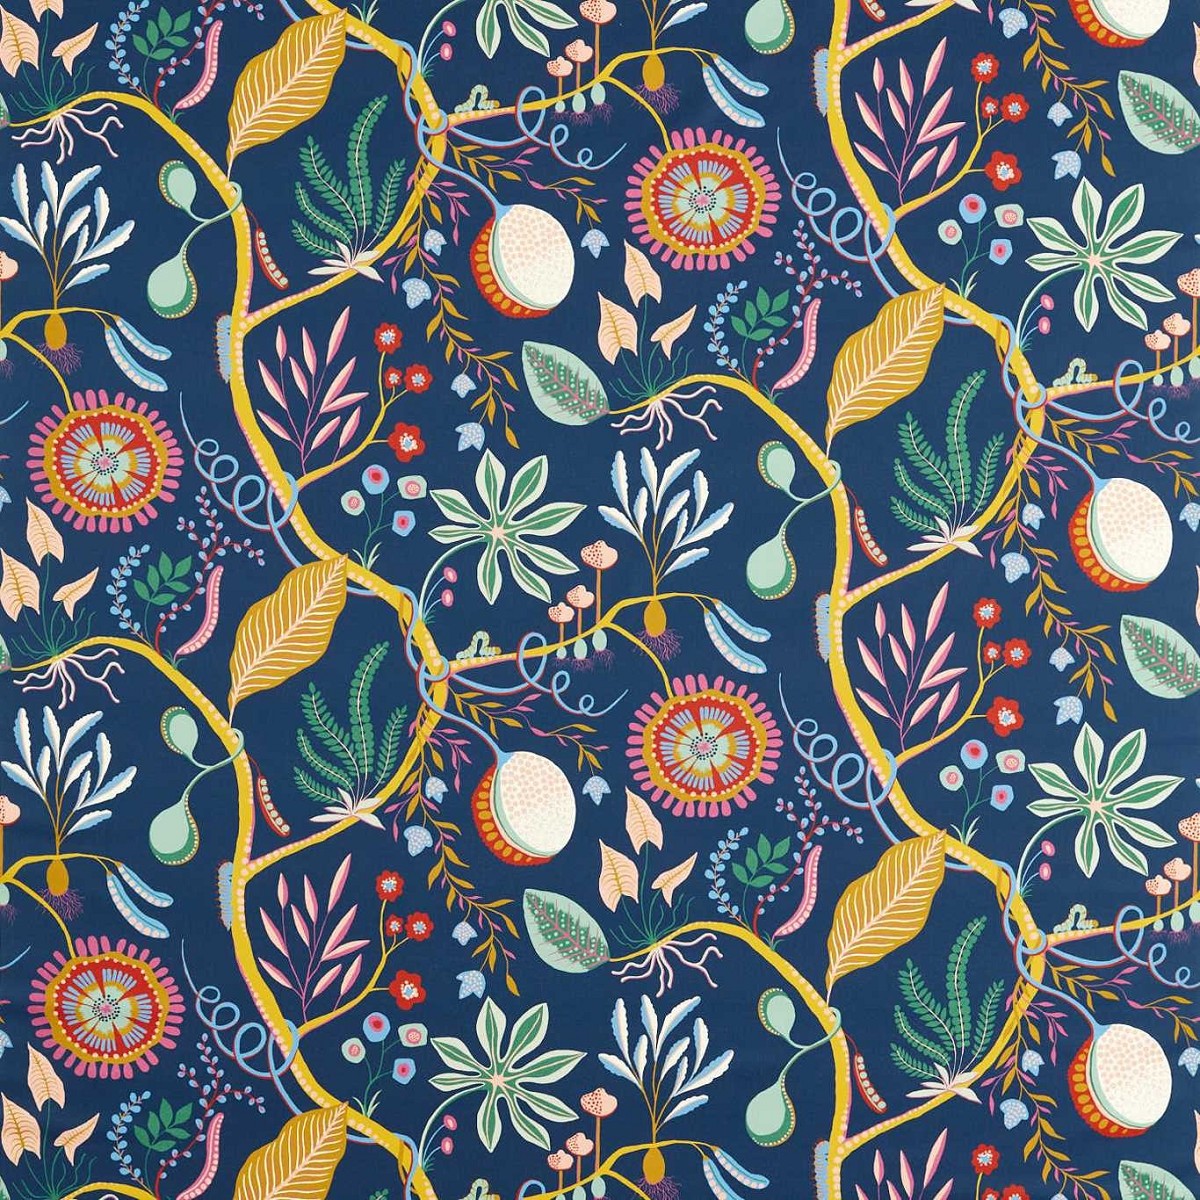 Jackfruit and the Beanstalk Midnight Fabric by Scion